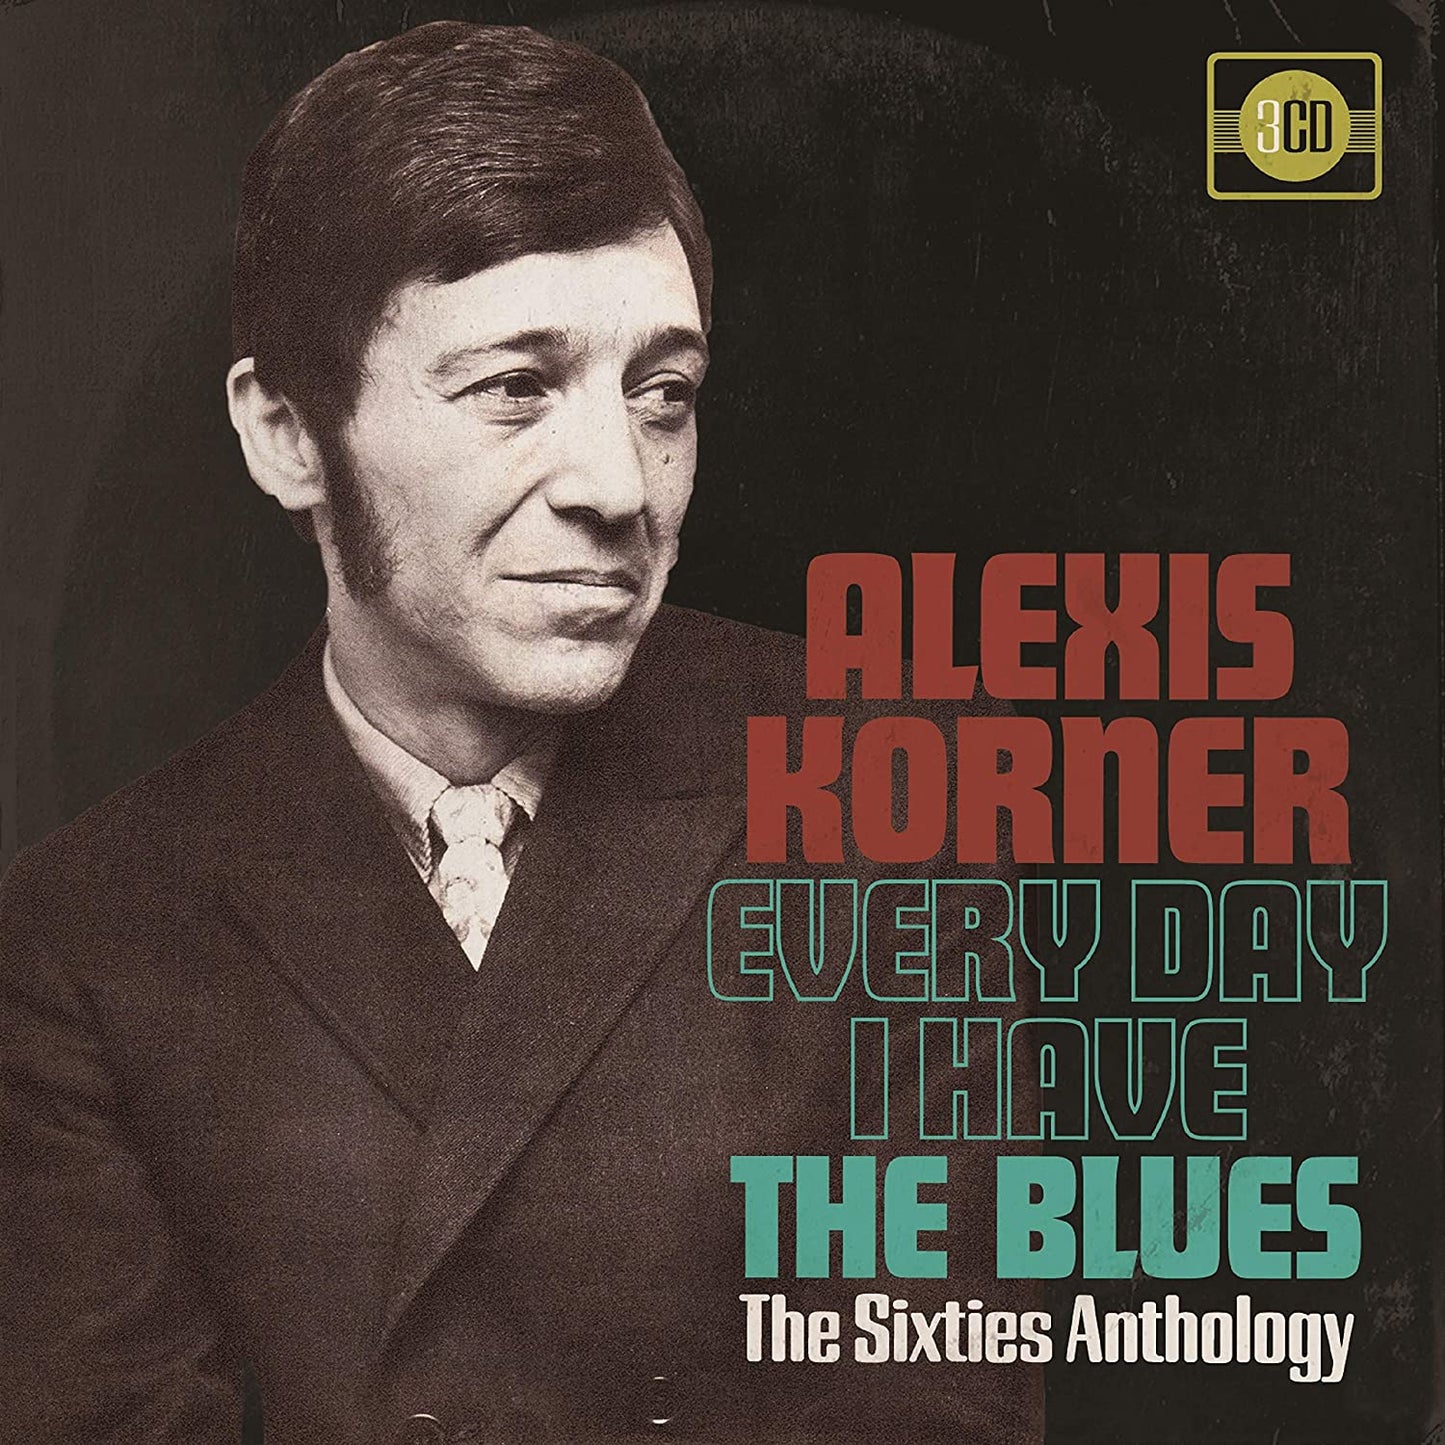 Korner, Alexis/Everyday I Have The Blues - The Sixties Anthology  (3CD) [CD]